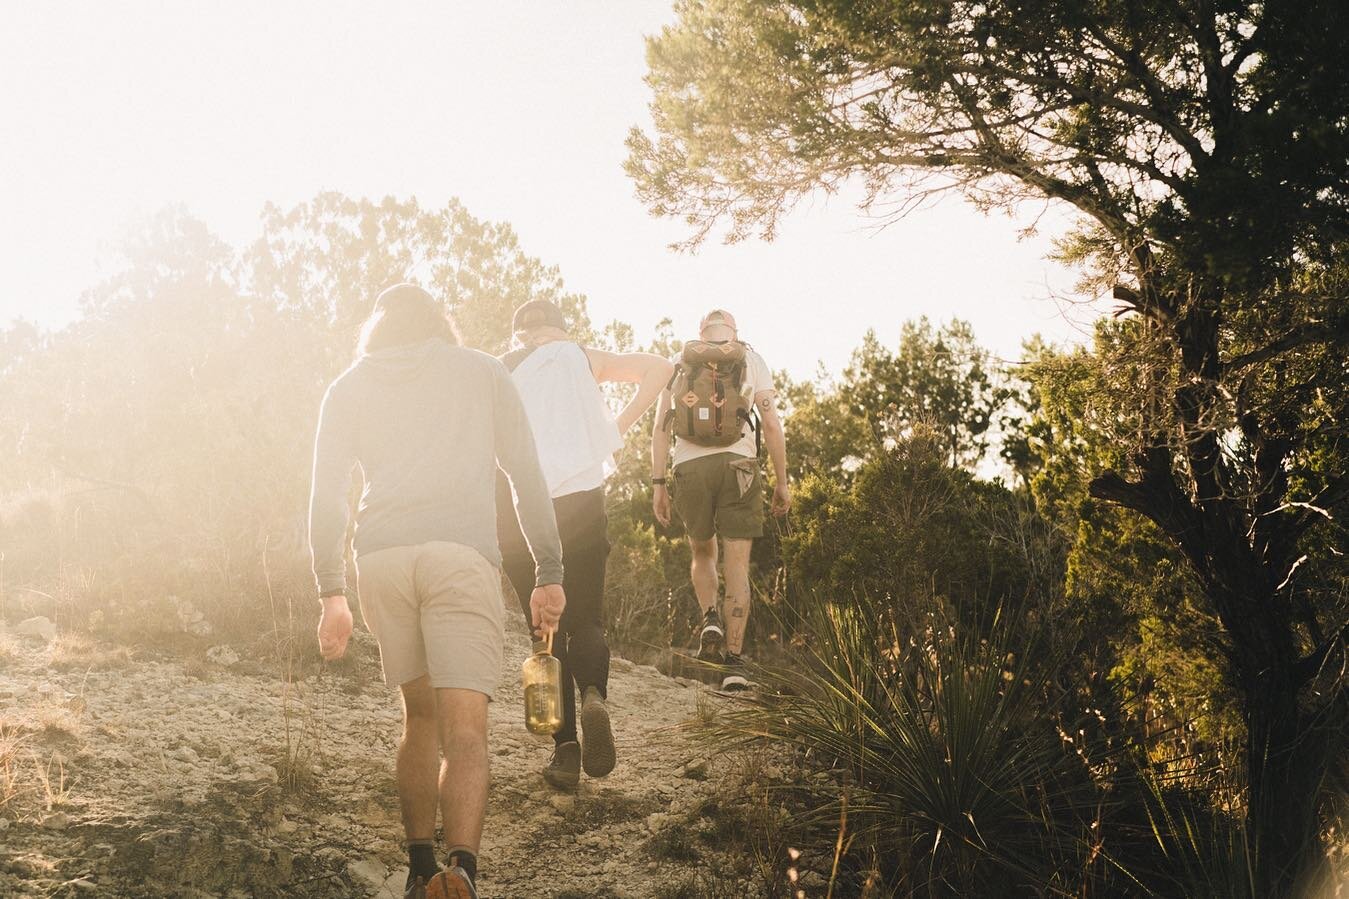 Sunset Hike!
When: This Monday 3/14 

Stoked for later sunsets and getting a hike in on a school night with ya.

Details: Meet at 6pm in the Walnut Creek Parking lot - look for the O&amp;O 🪧
Bonus: it&rsquo;s free and we&rsquo;ll hang after with som